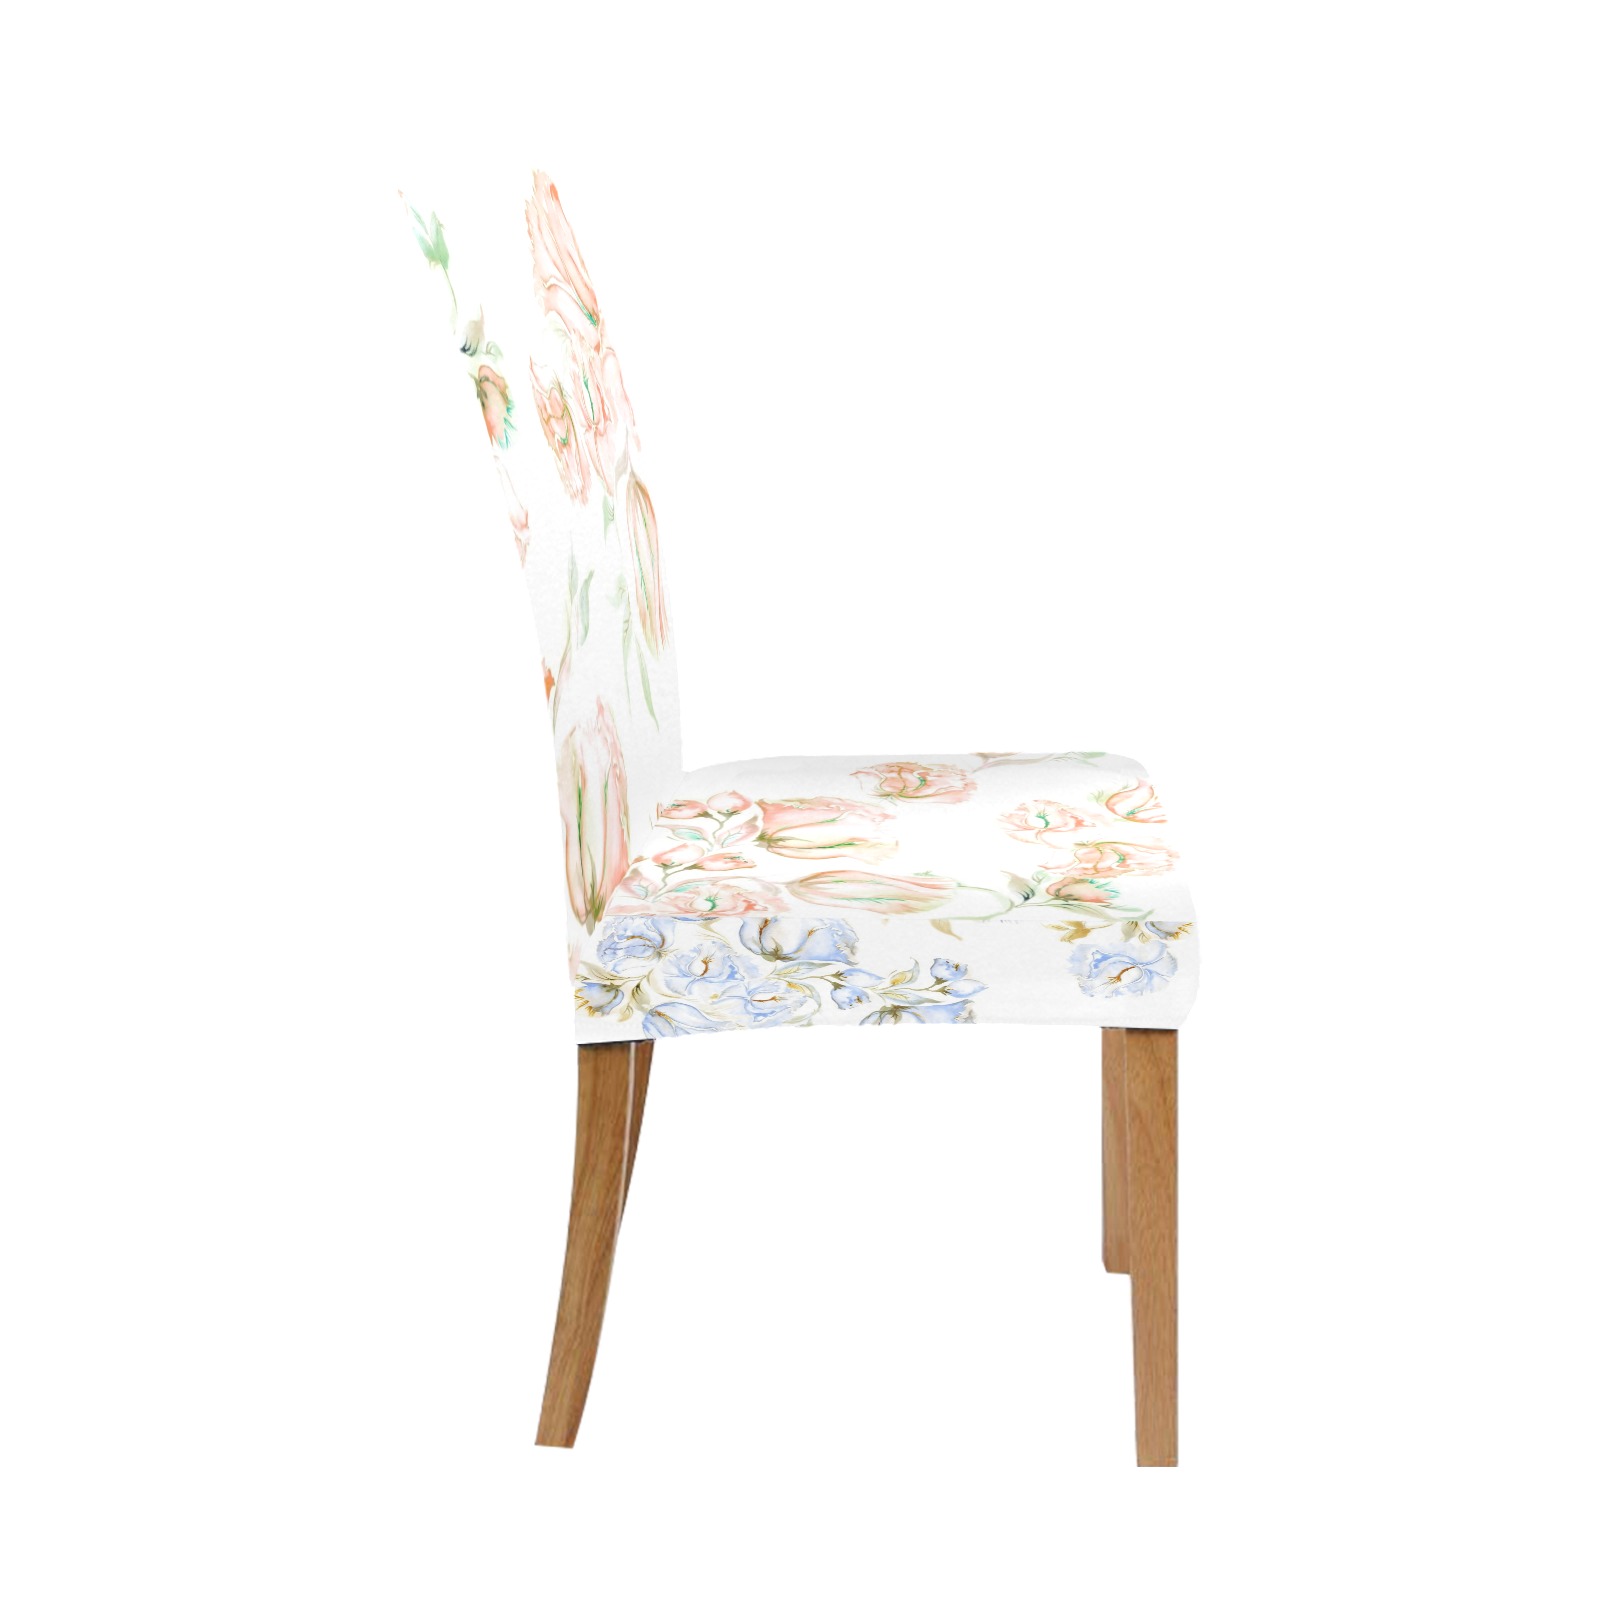 Chinese Peonies 4 Chair Cover (Pack of 6)